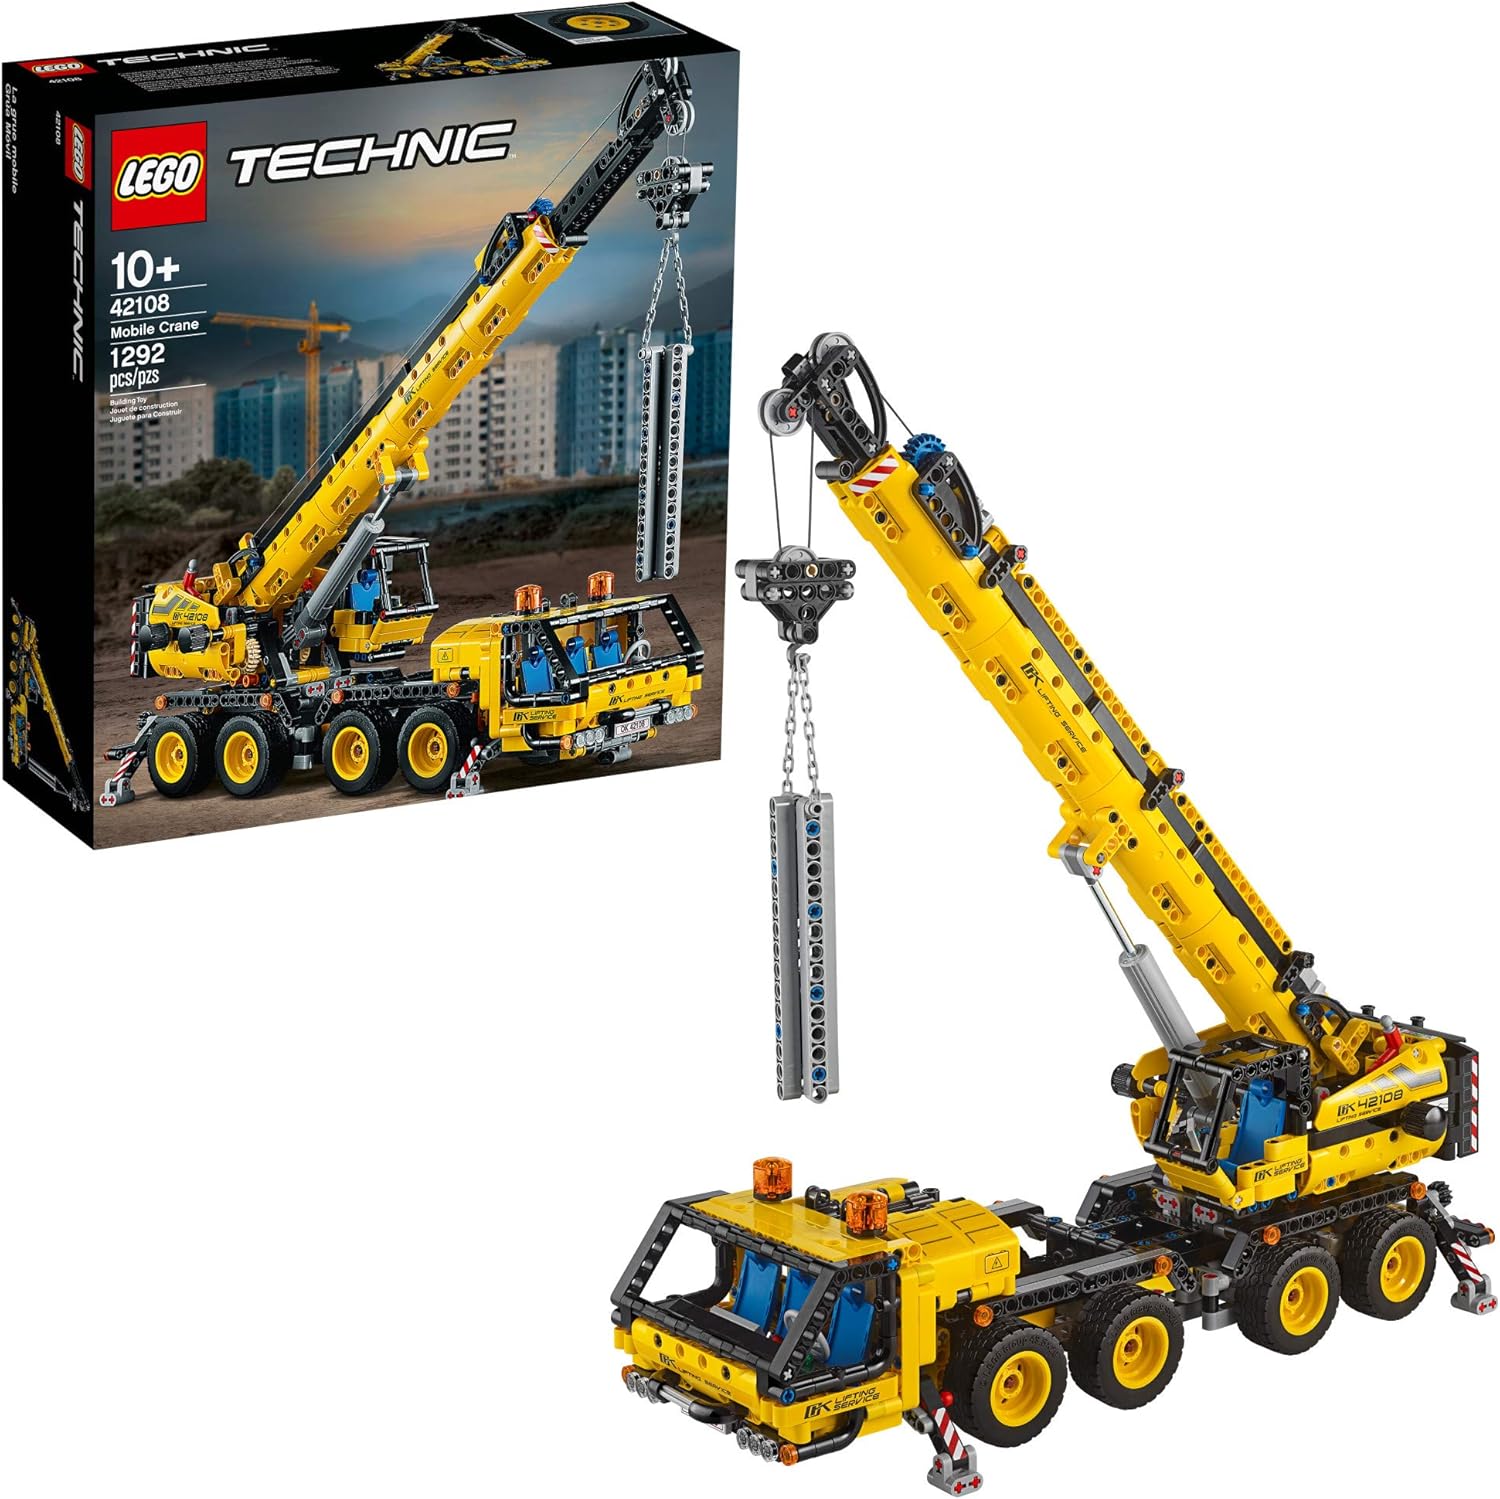 LEGO Technic Mobile Crane 42108 Building Kit_ A Super Model Crane to Build for Any Fan of Construct